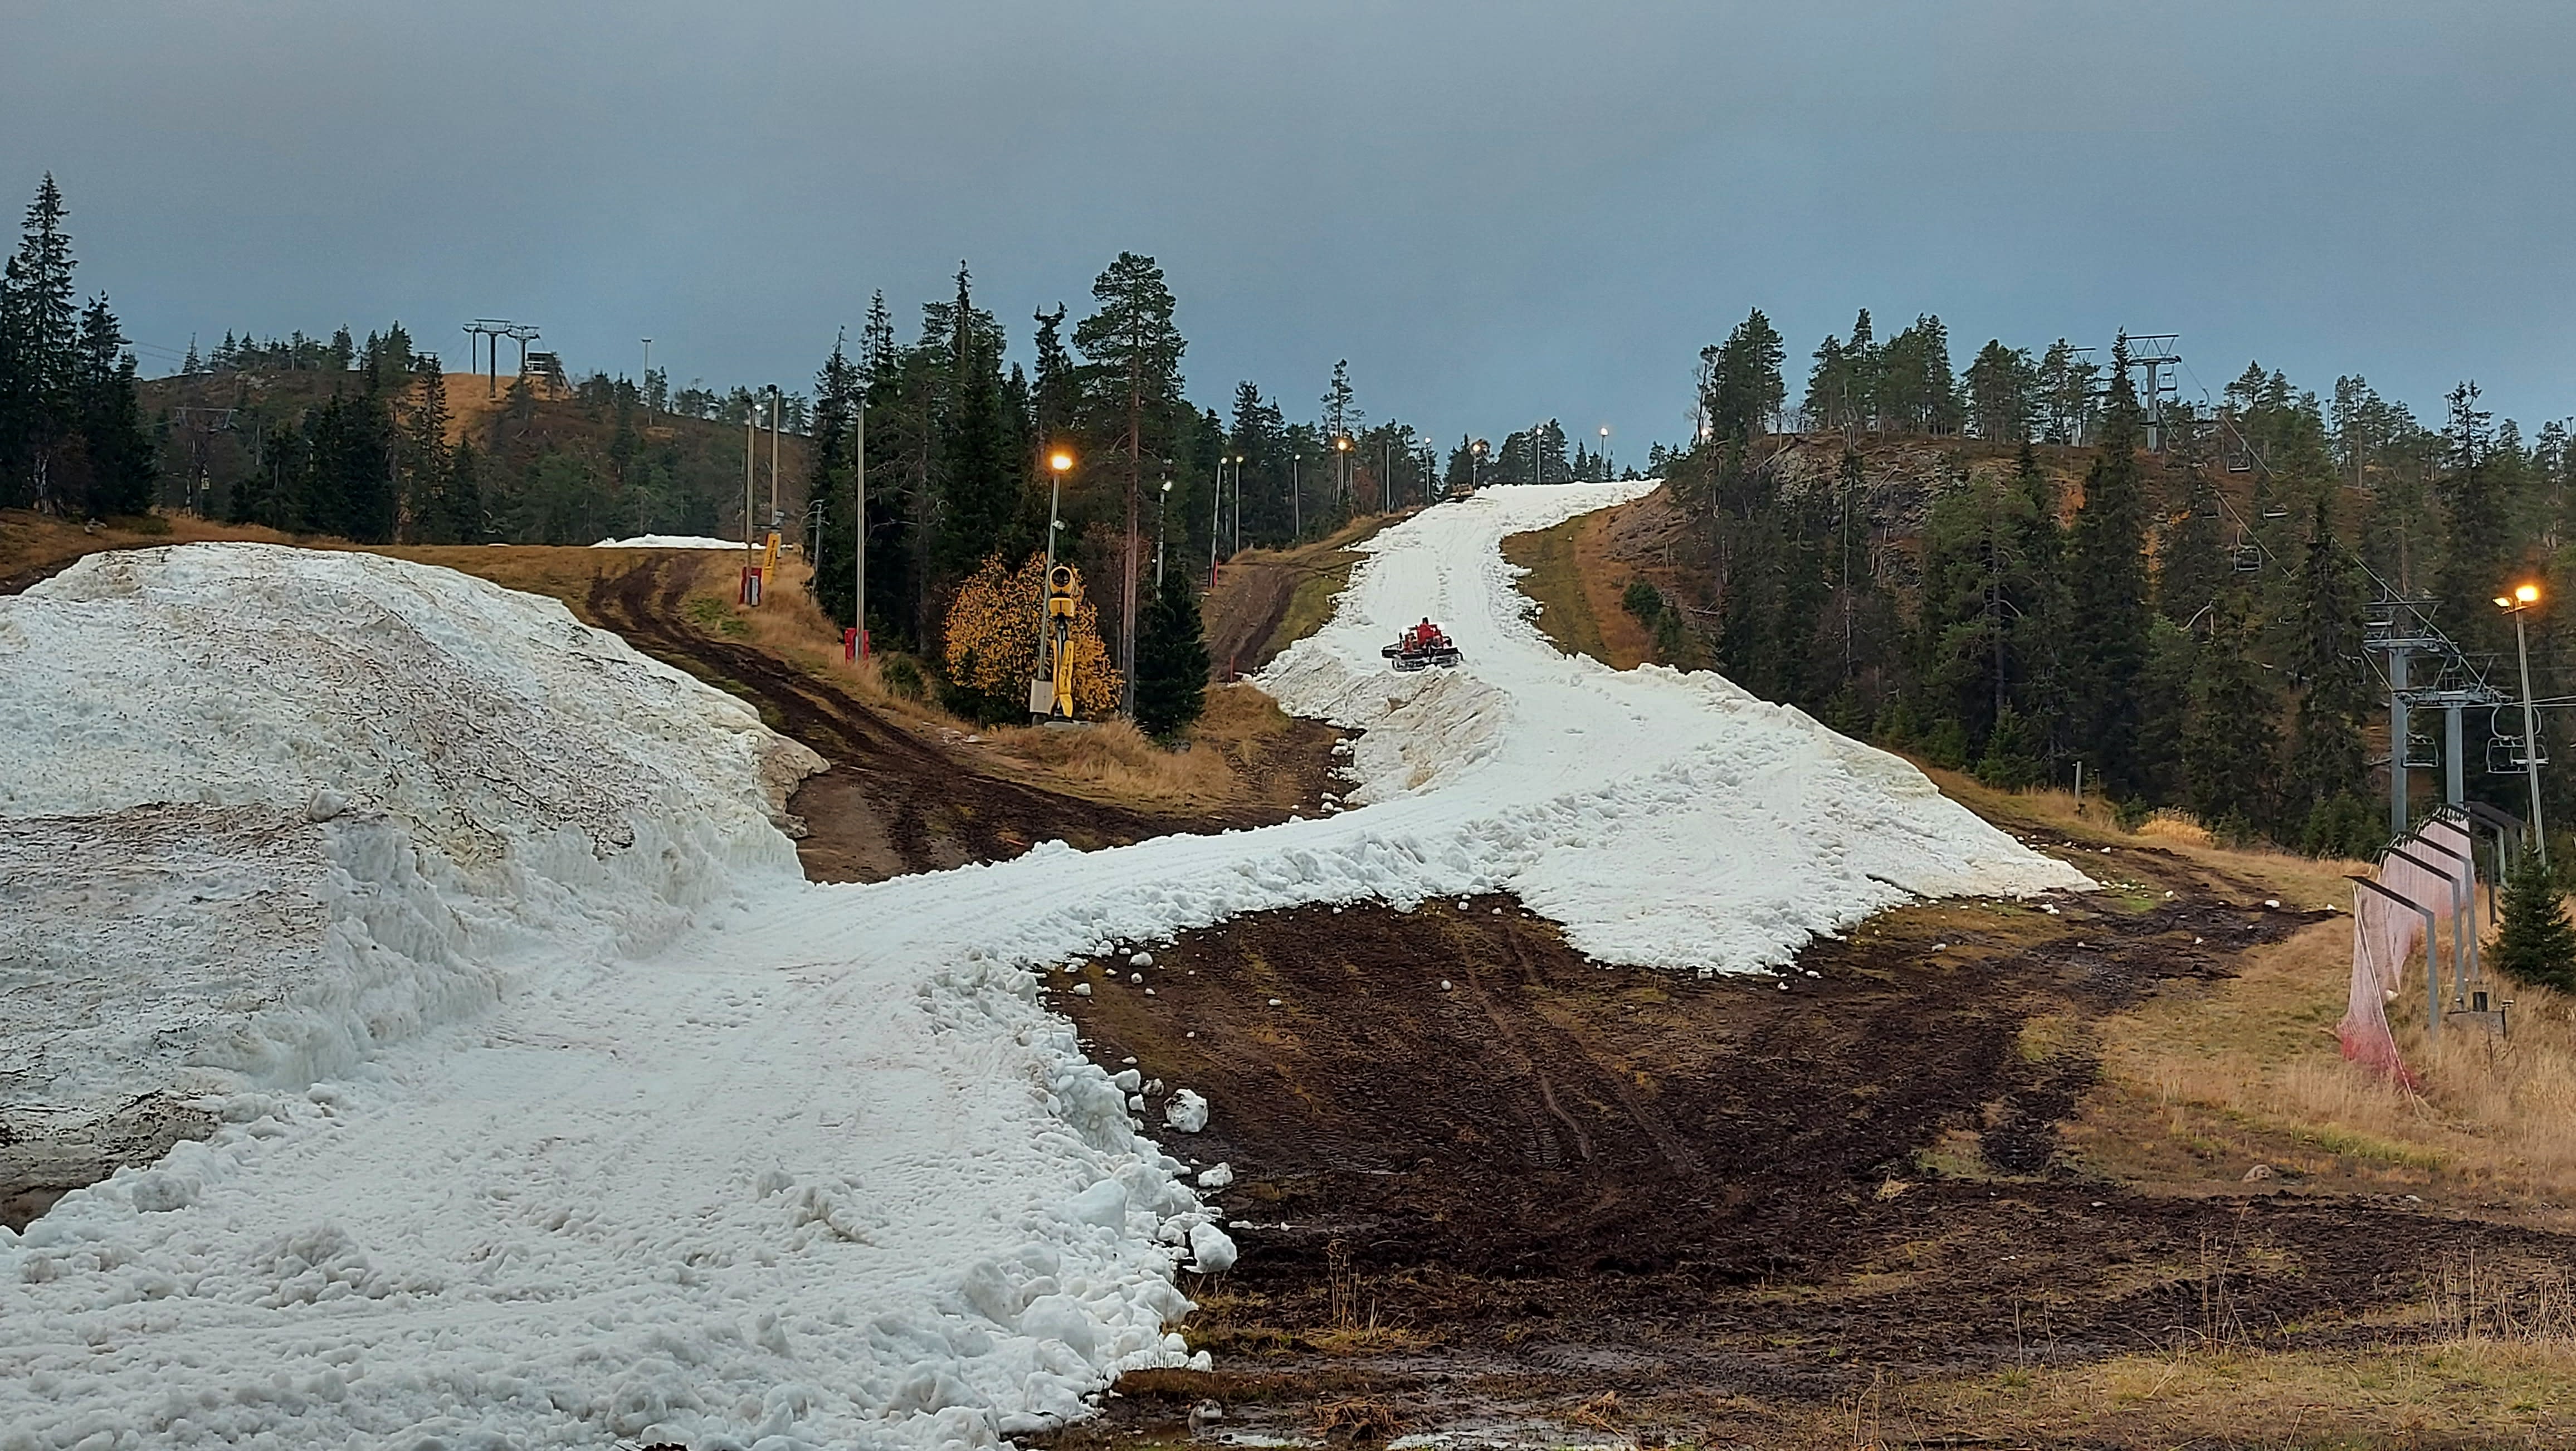 Snow recycling in northern Finland for skiers in October